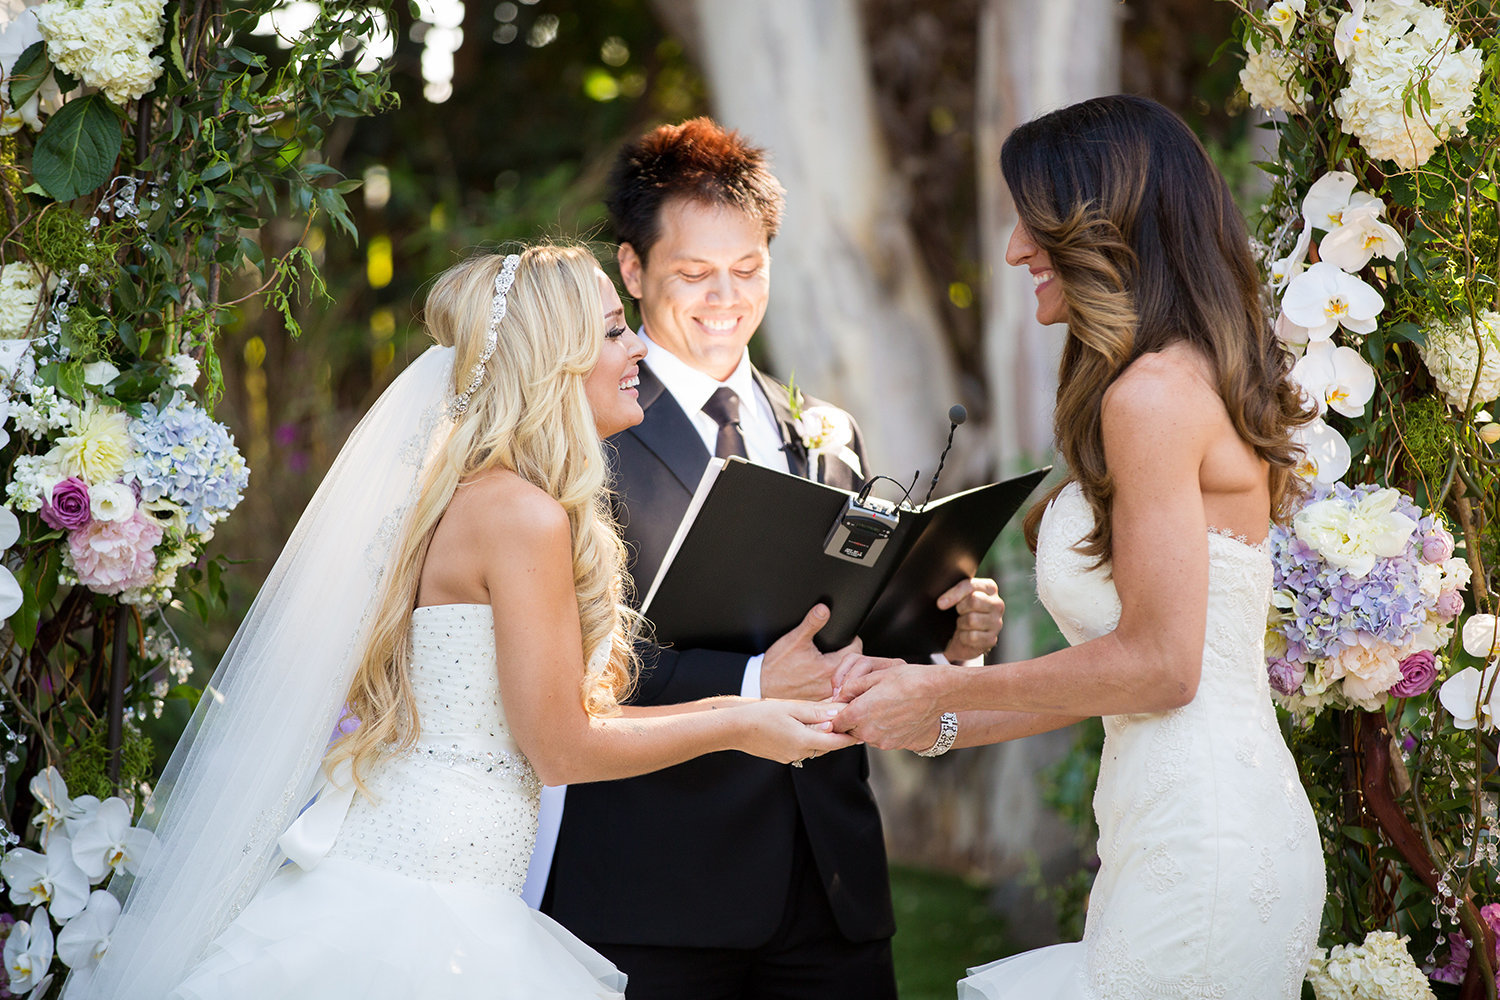 Two brides say their vows at a colorful wedding ceremony